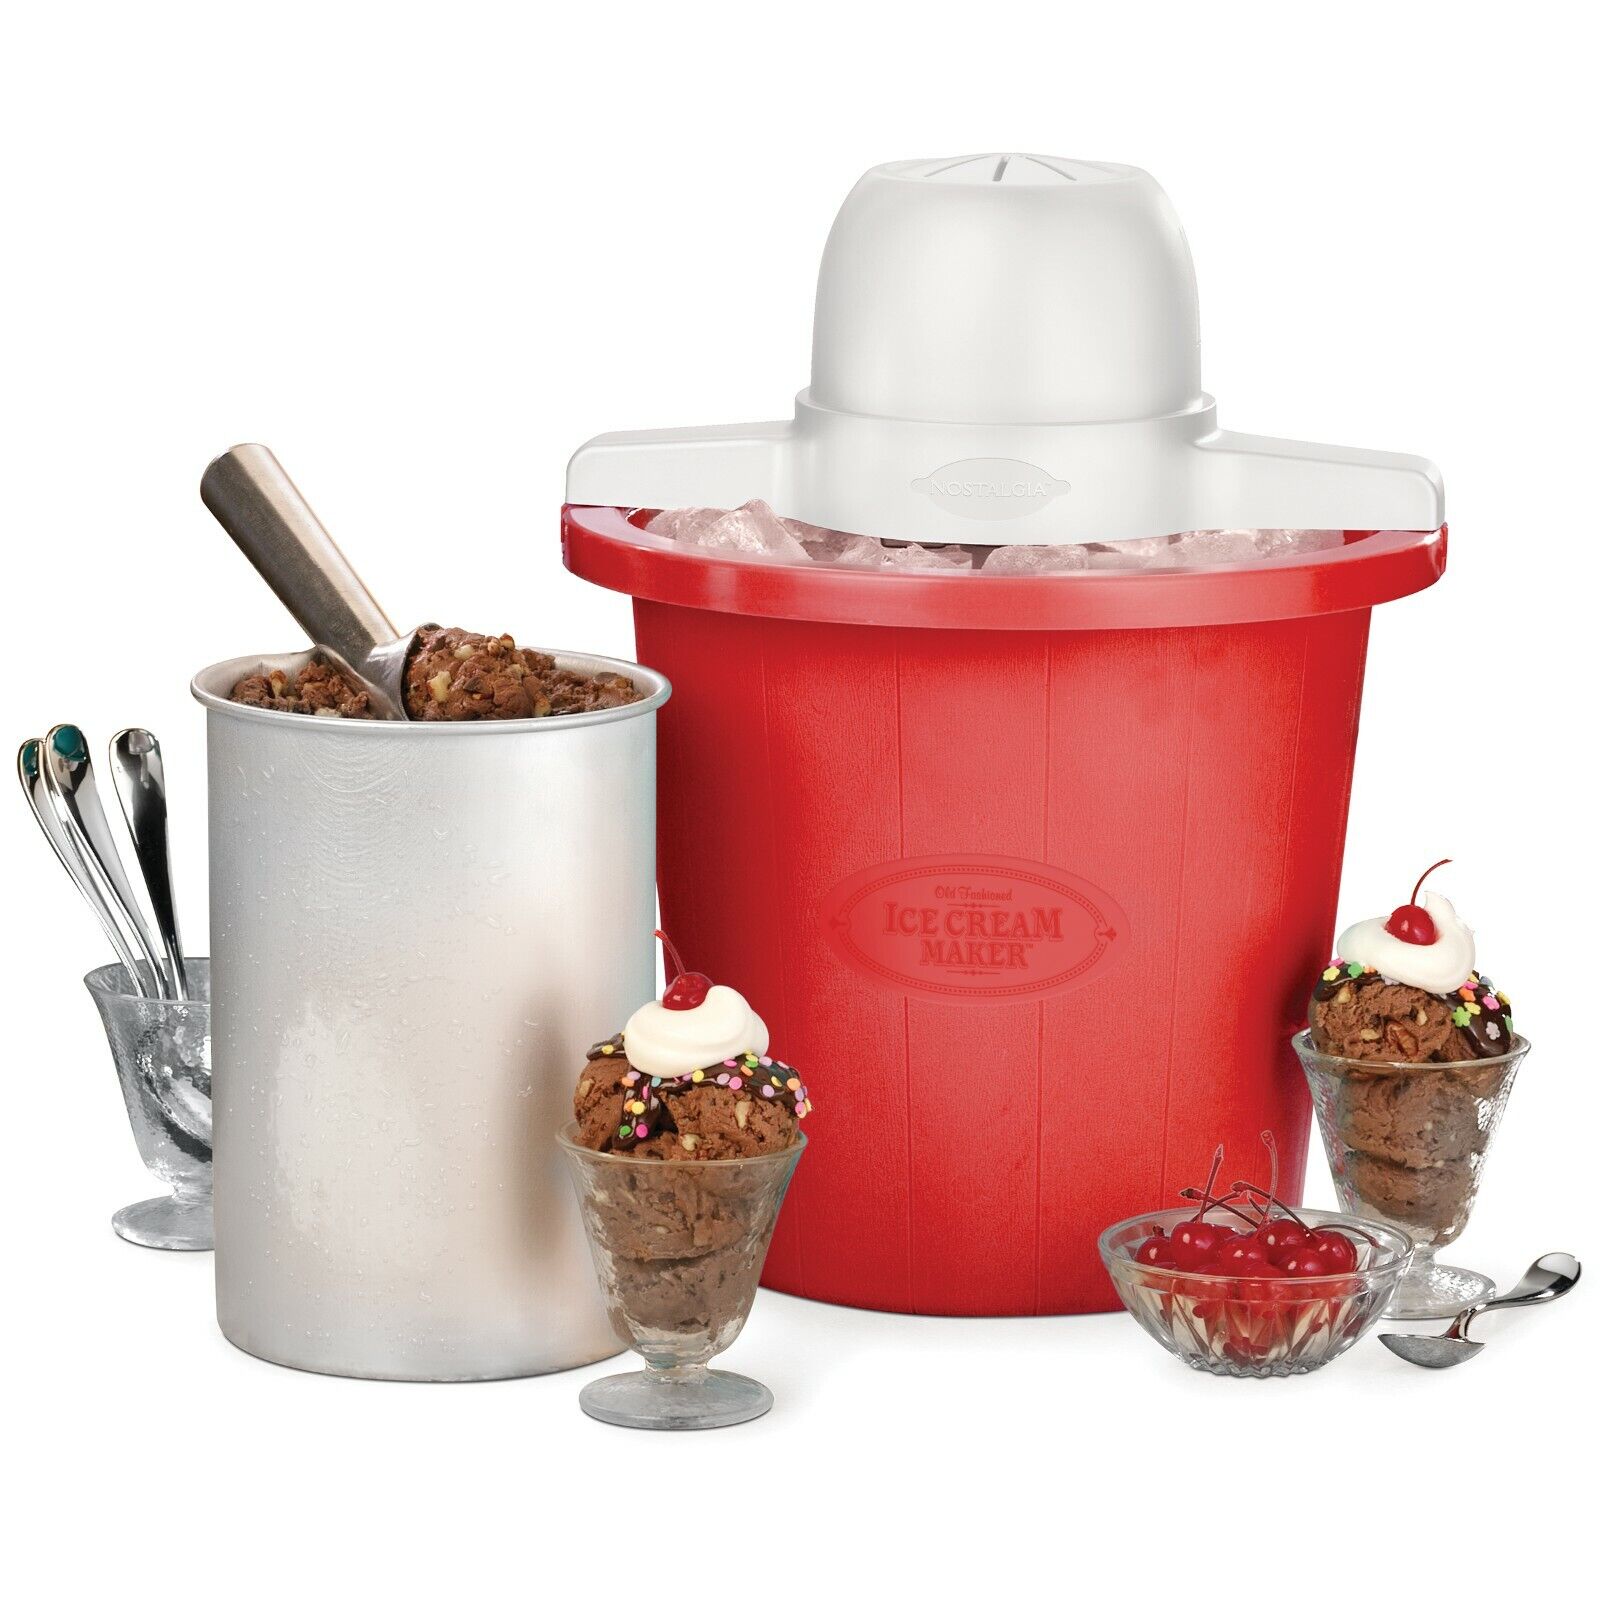 What All Is Needed To Make Ice Cream With A 4 Qt Ice Cream Maker